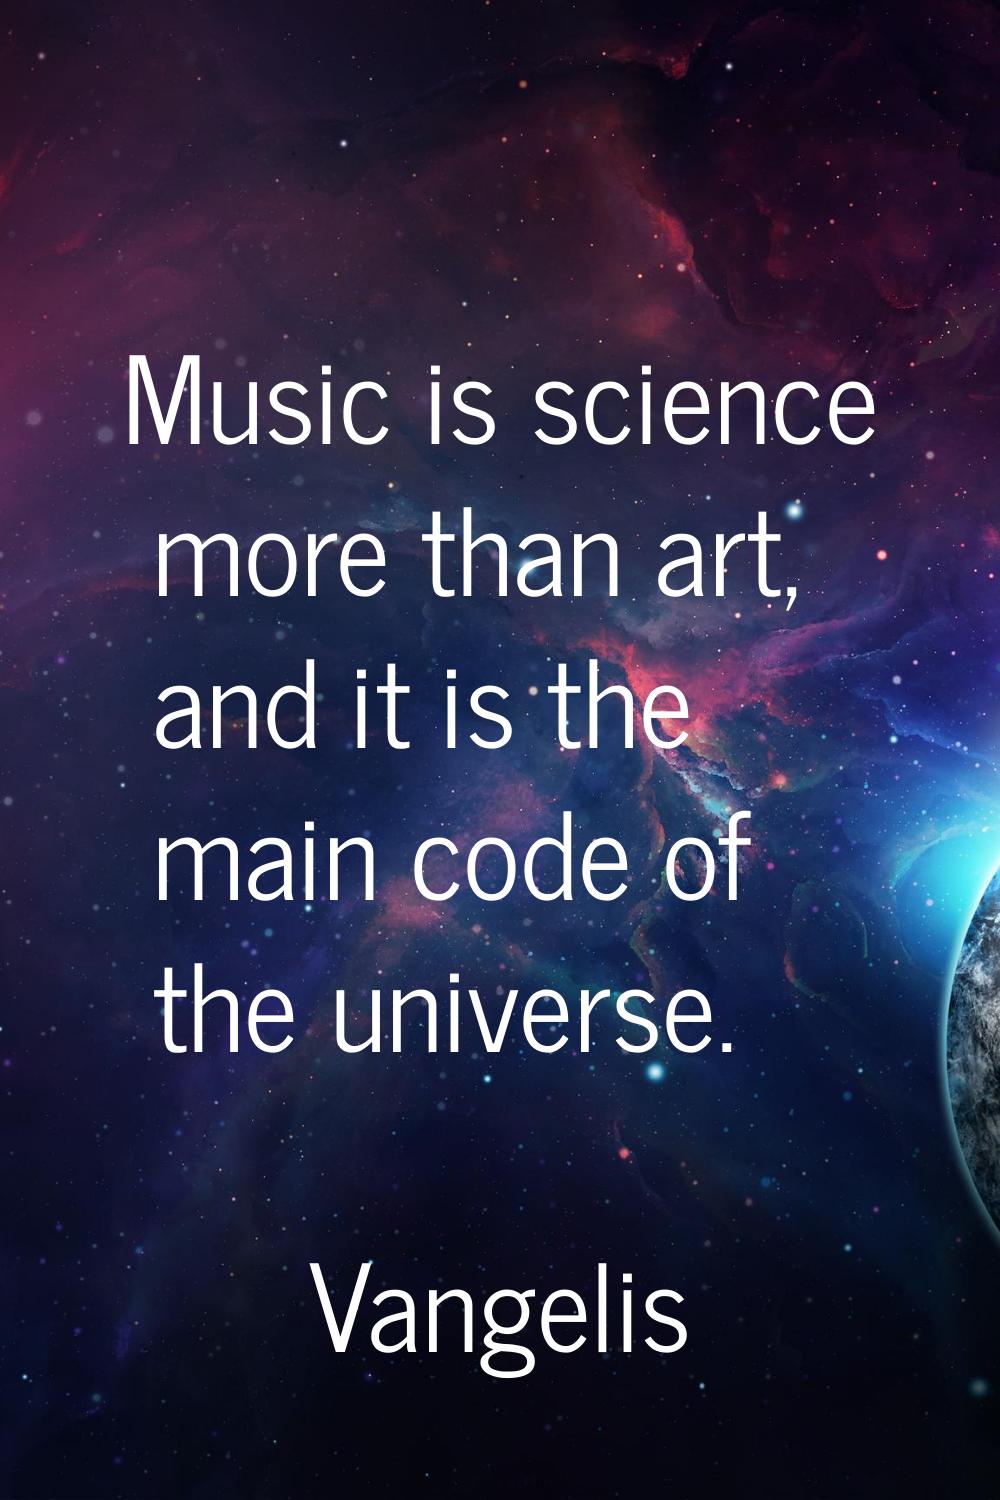 Music is science more than art, and it is the main code of the universe.